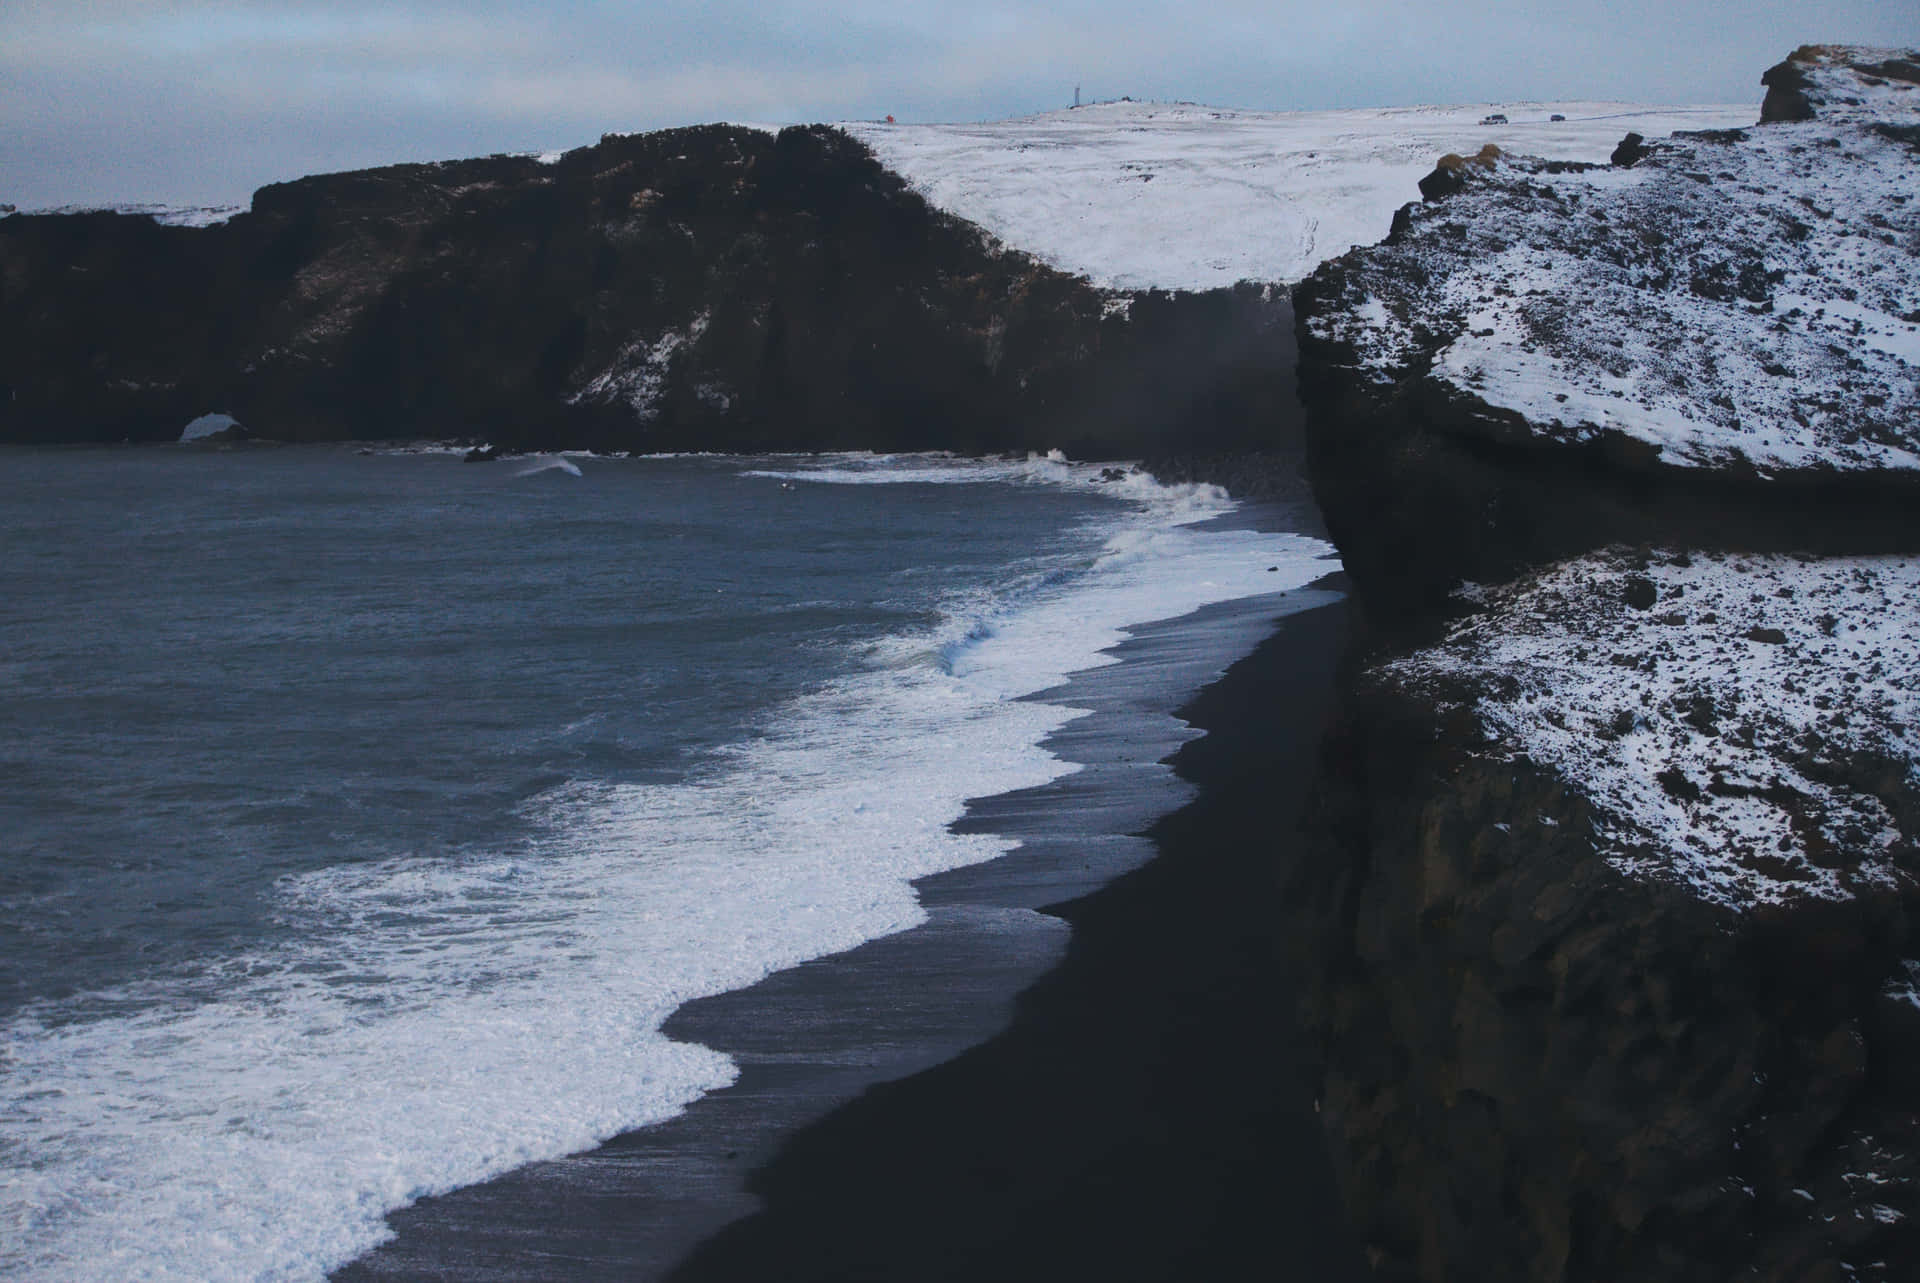 Relax and let the sea breeze wash away worry at this stunning Black Sand Beach. Wallpaper